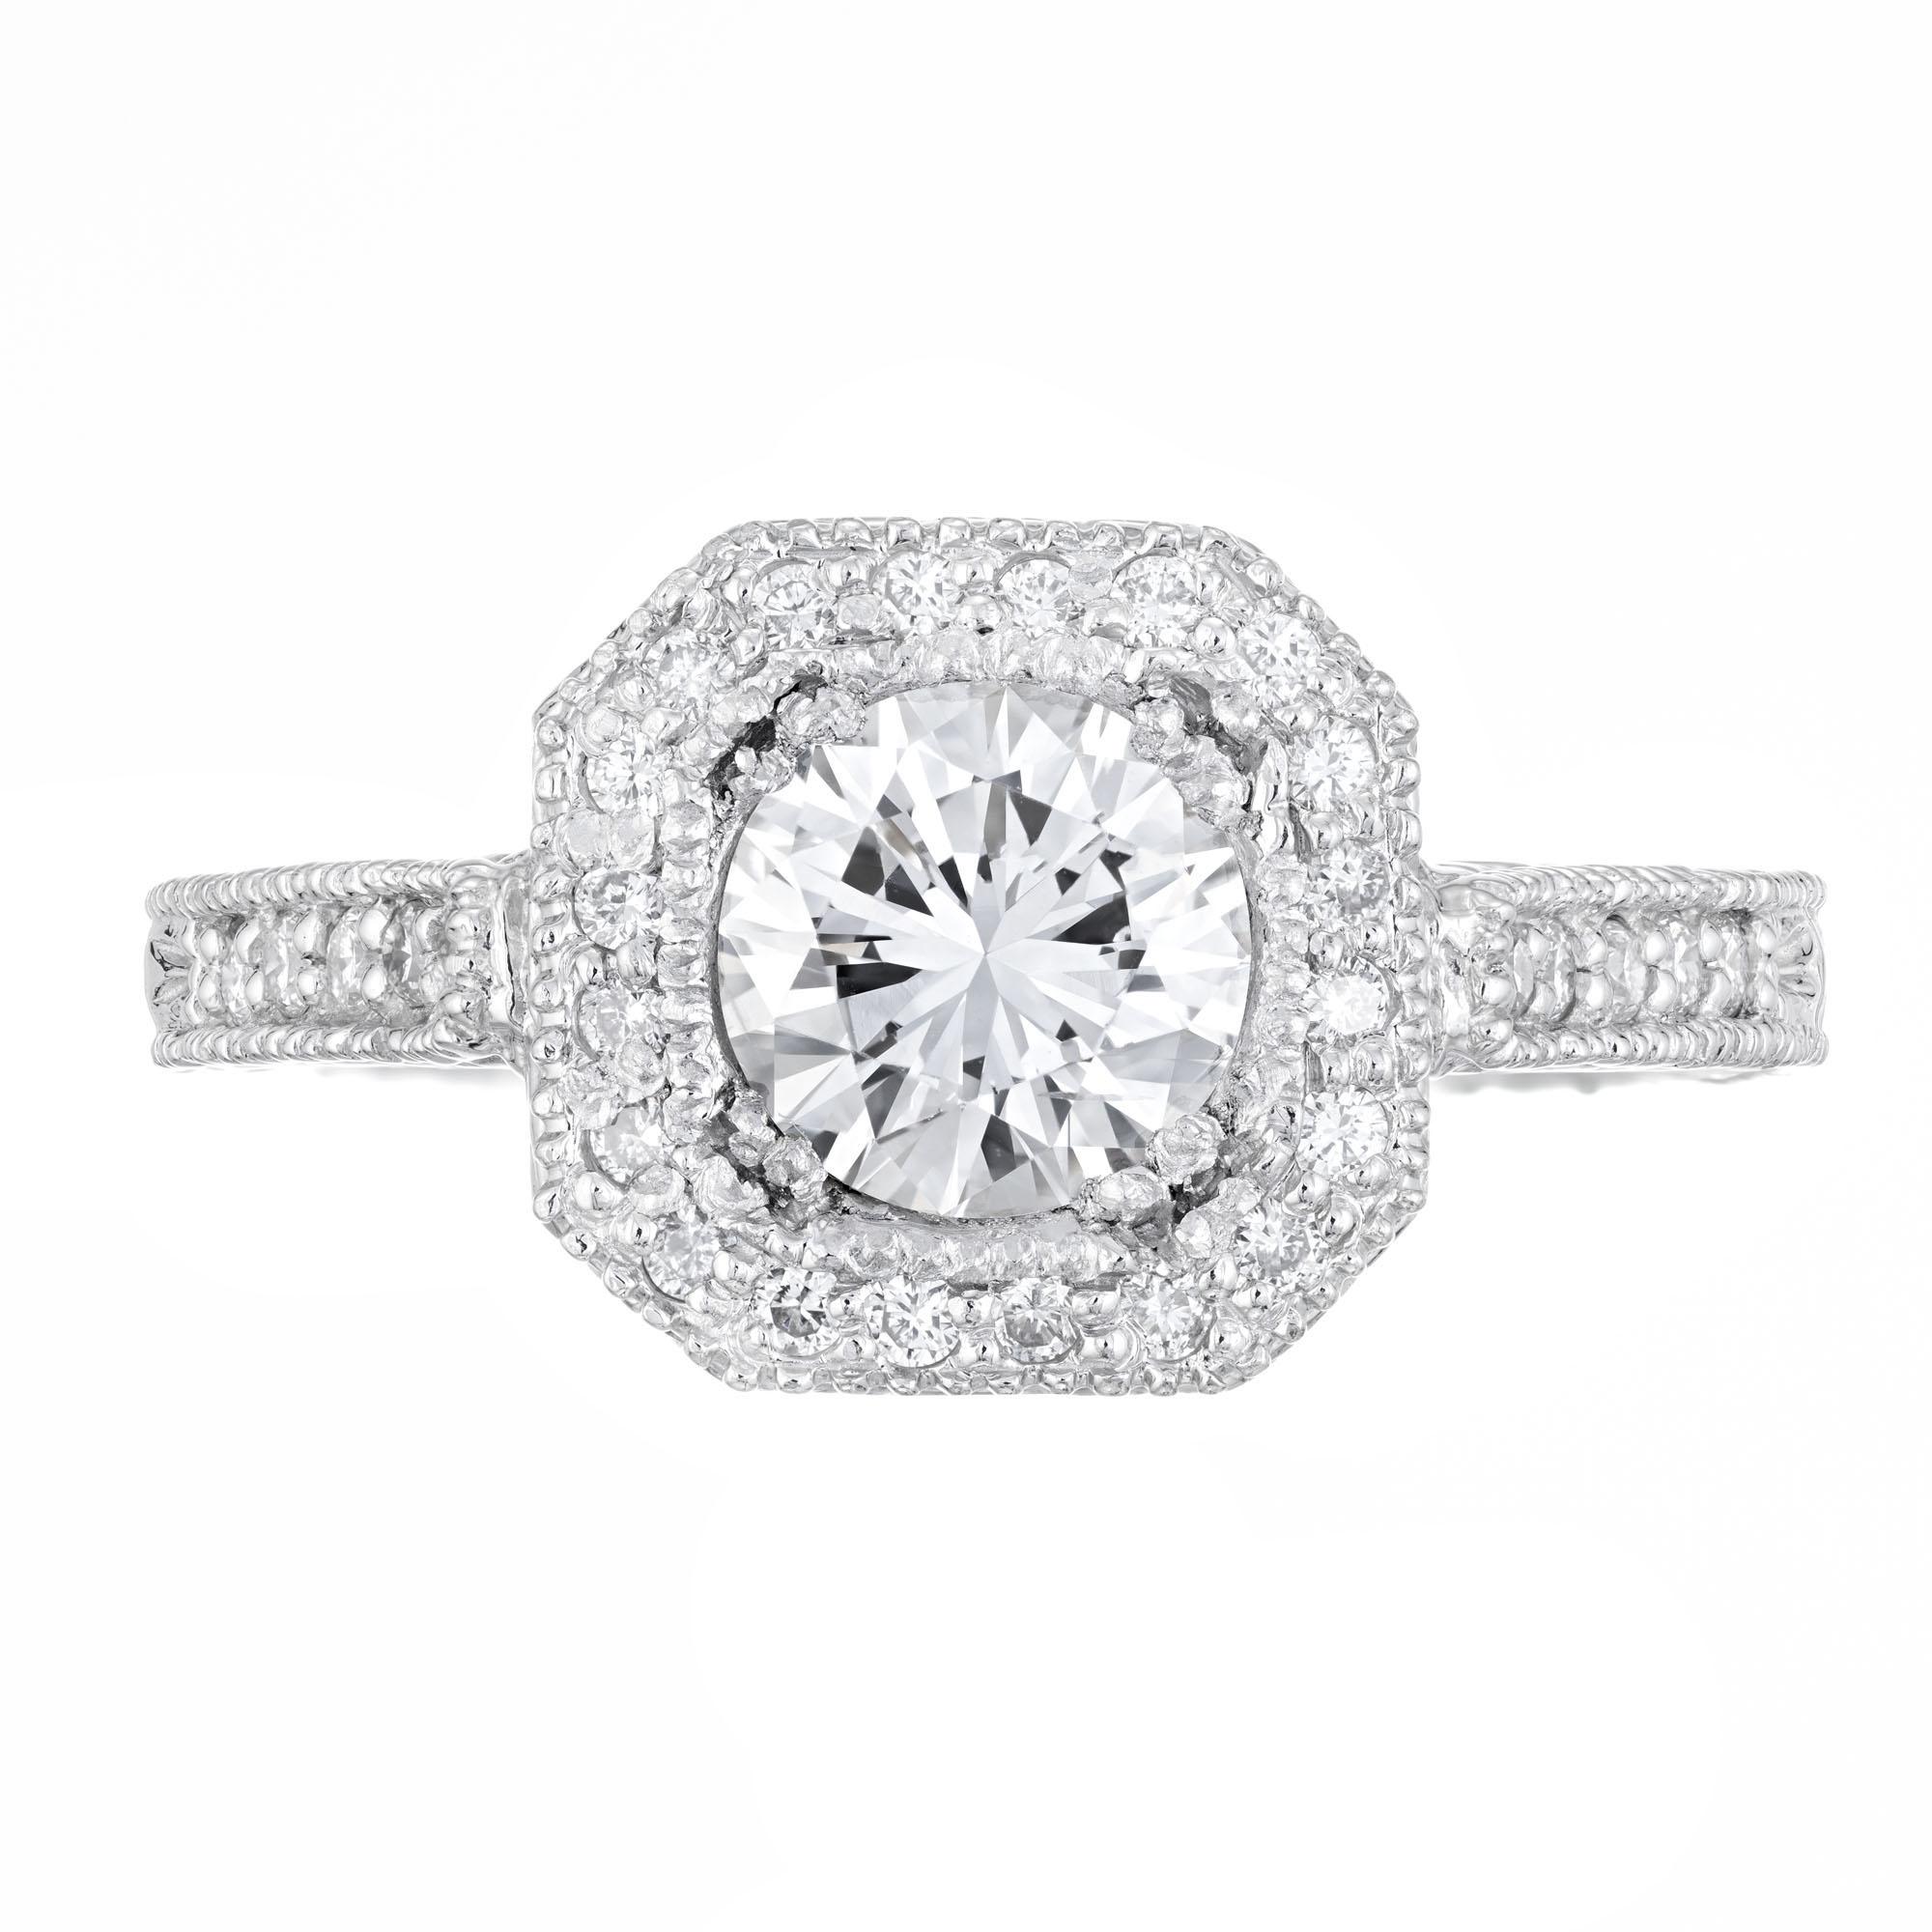 Diamond engagement ring. EGL certified center stone in a platinum halo setting with 60 round accent diamonds. 

1 round diamond G SI2, approx. 1.05cts EGL Certificate # US4553113D
30 round diamonds F VS, approx. .40cts
30 round Ideal diamonds F VS,